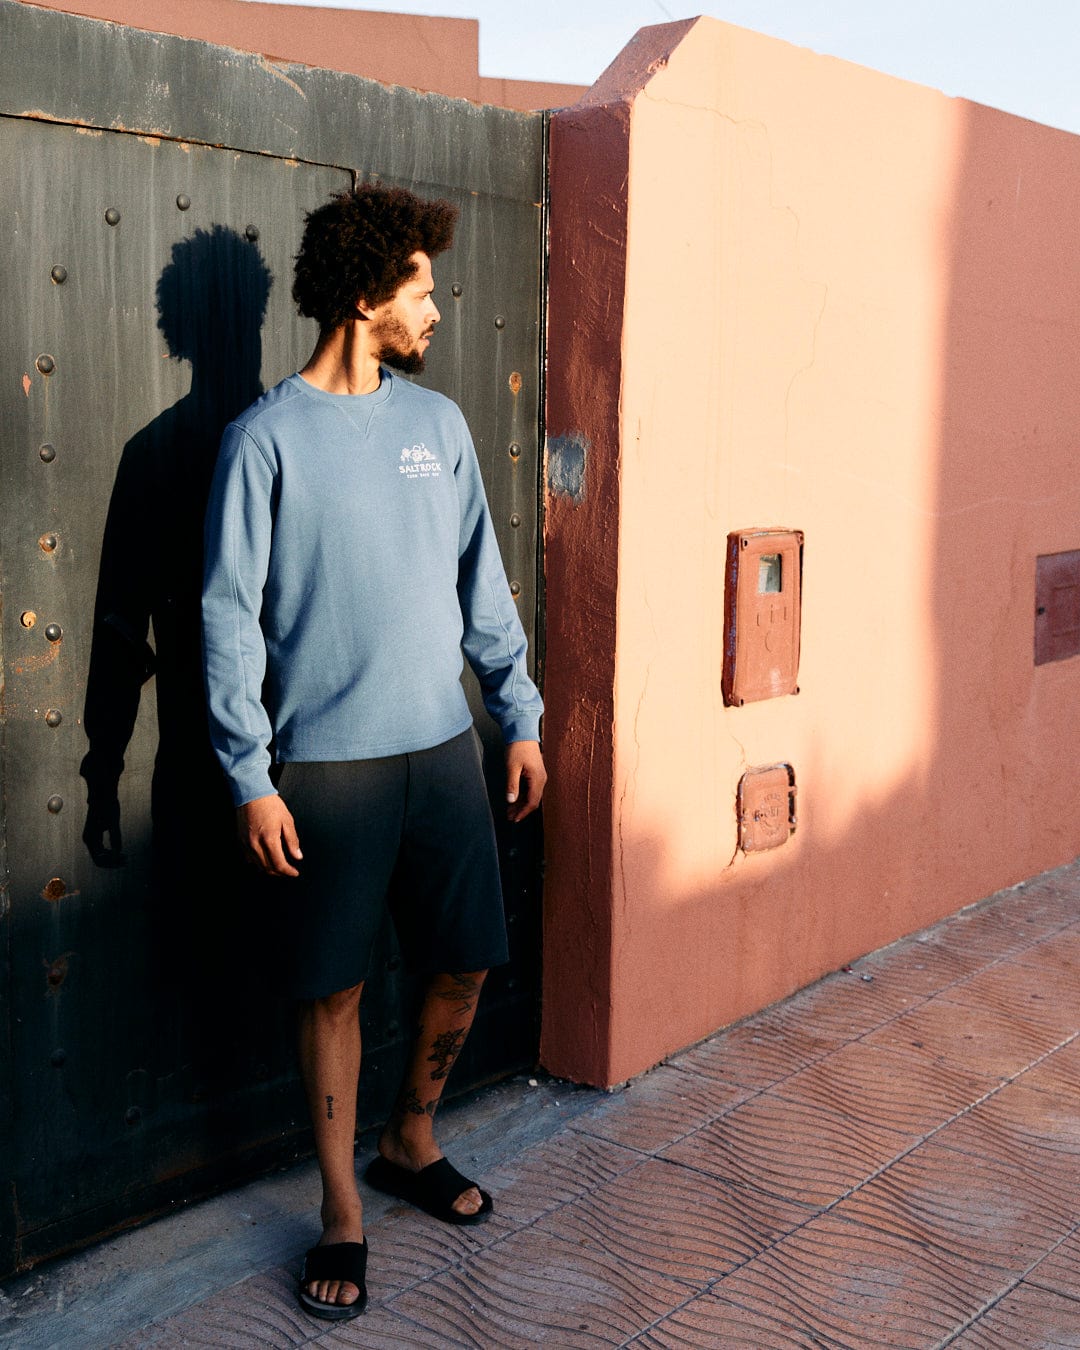 Man with curly hair standing beside a pink wall and green door during sunset, wearing a Last Stop Motel - Recycled Mens Sweatshirt in Blue from Saltrock, black shorts, and flip-flops.